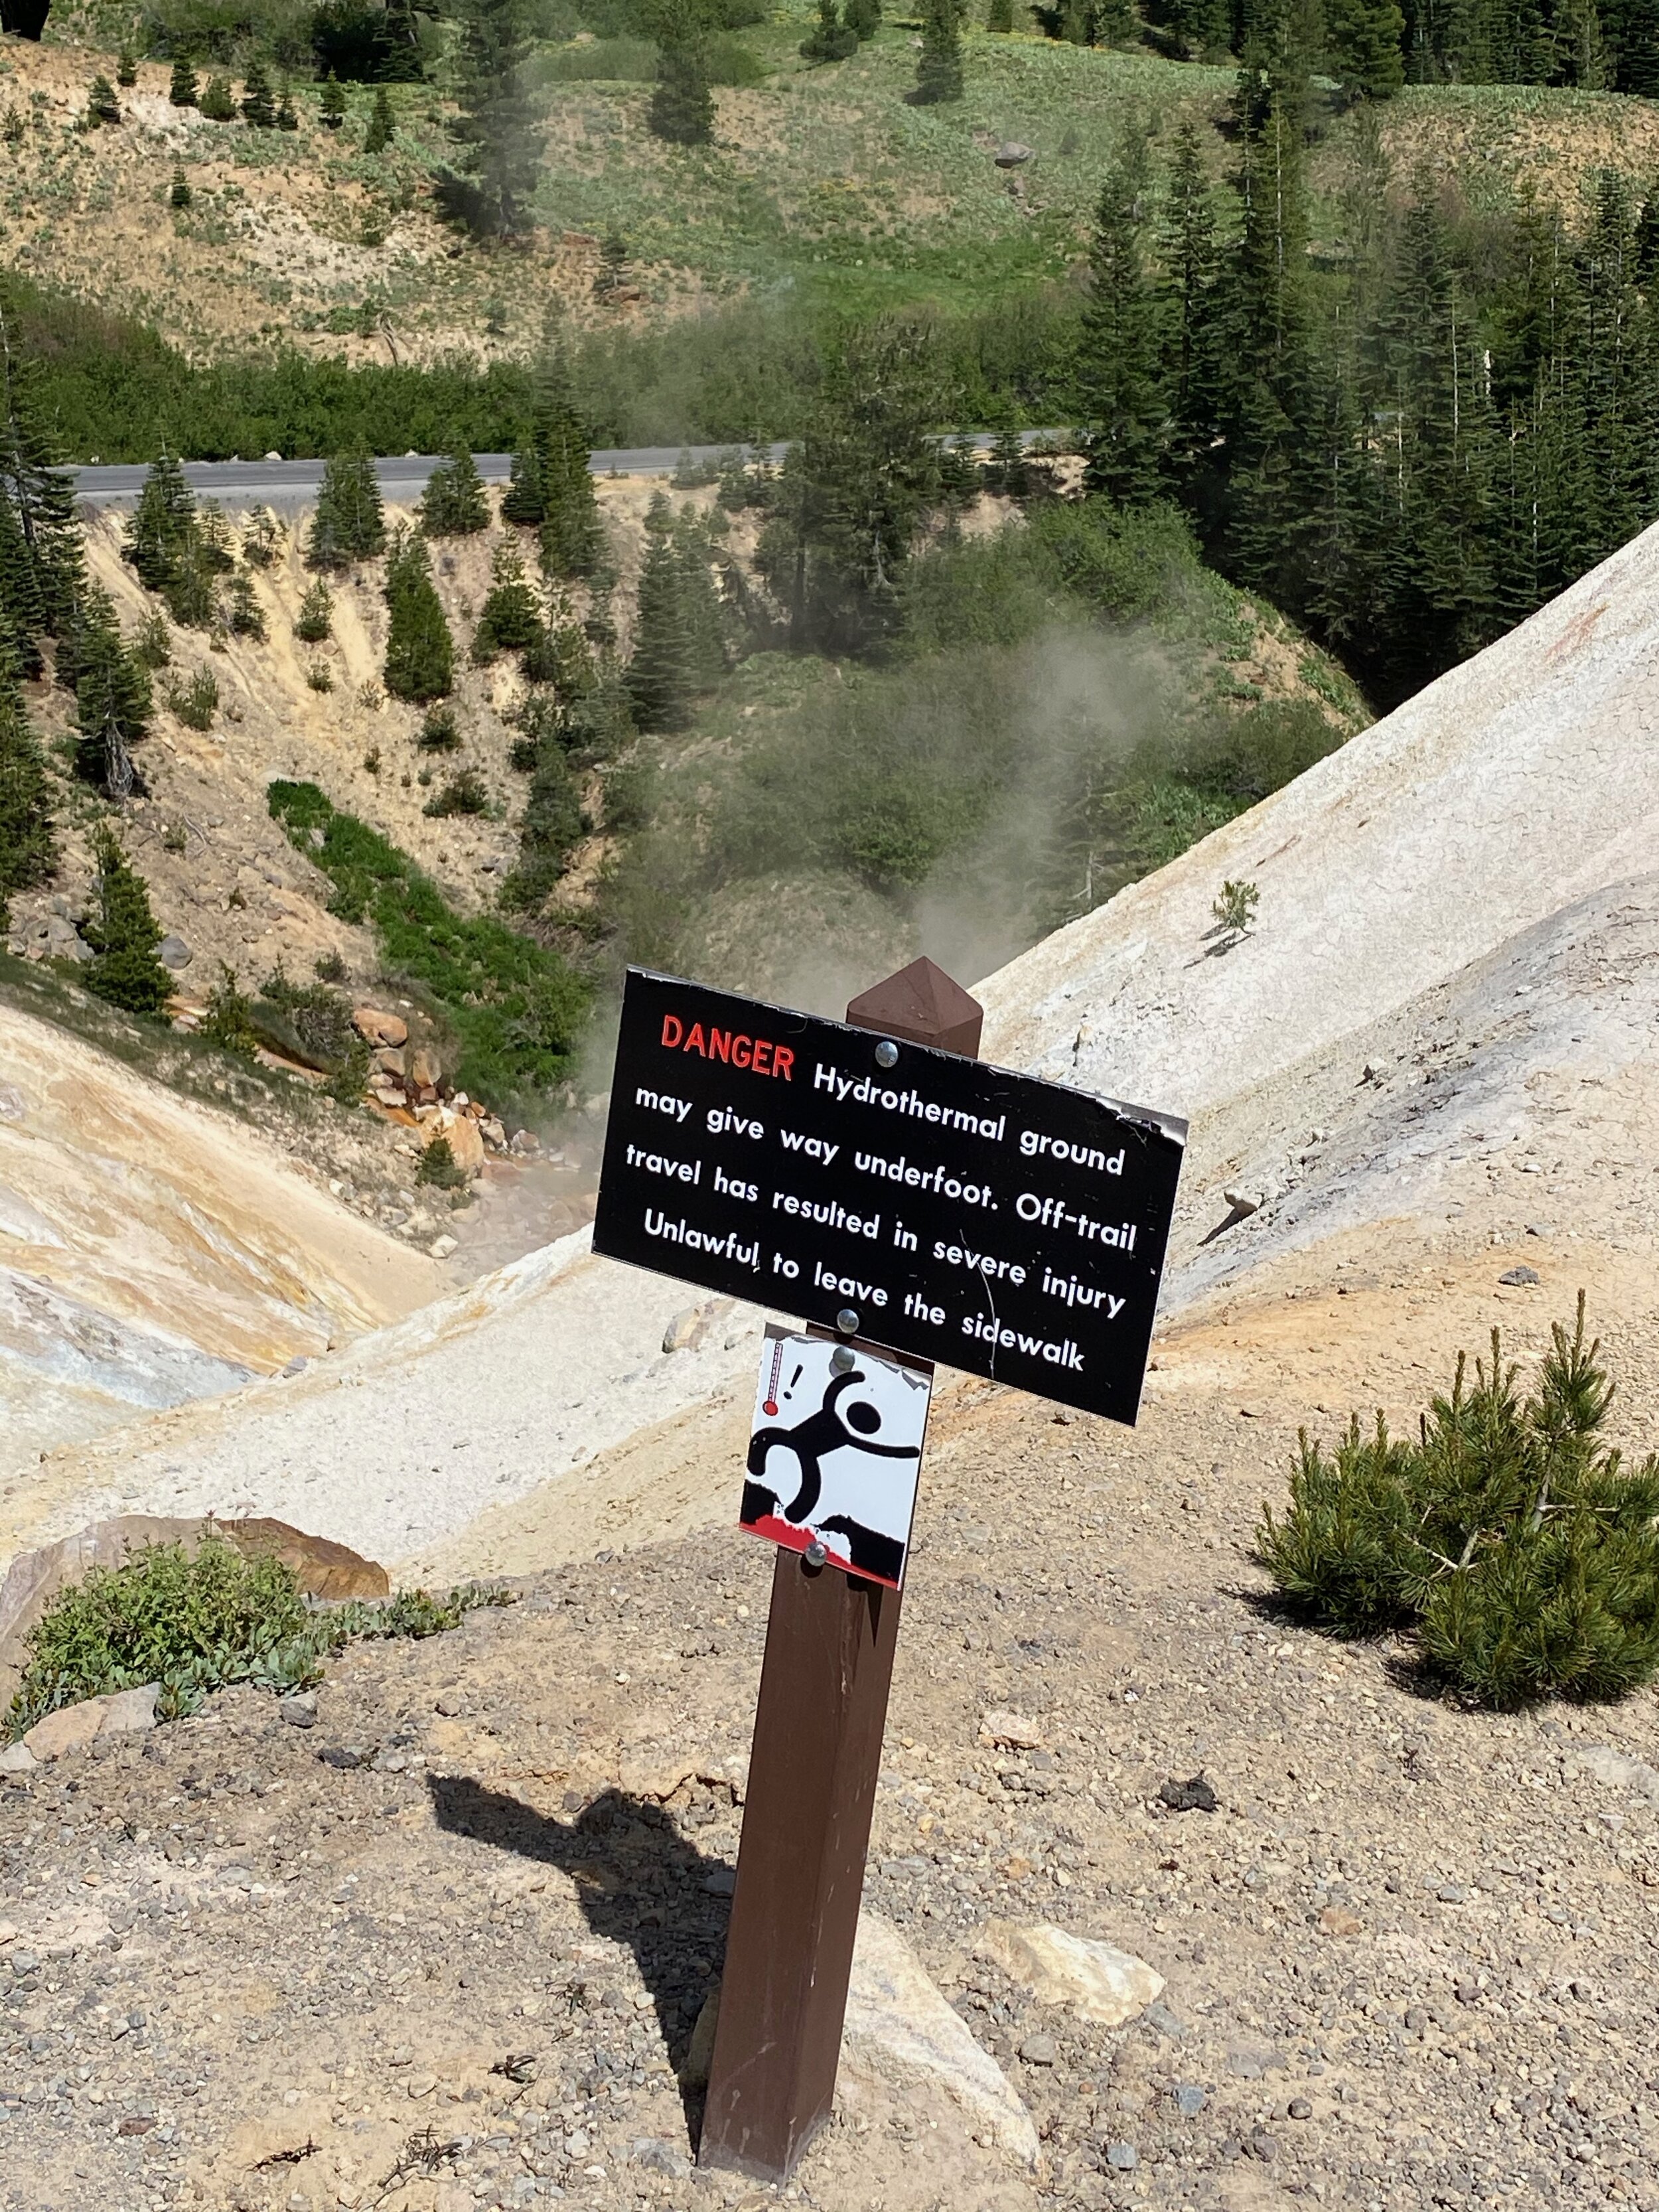 A pretty view and we always love the characters on these warning signs! Photo by Karen Boudreaux, June 8, 2021